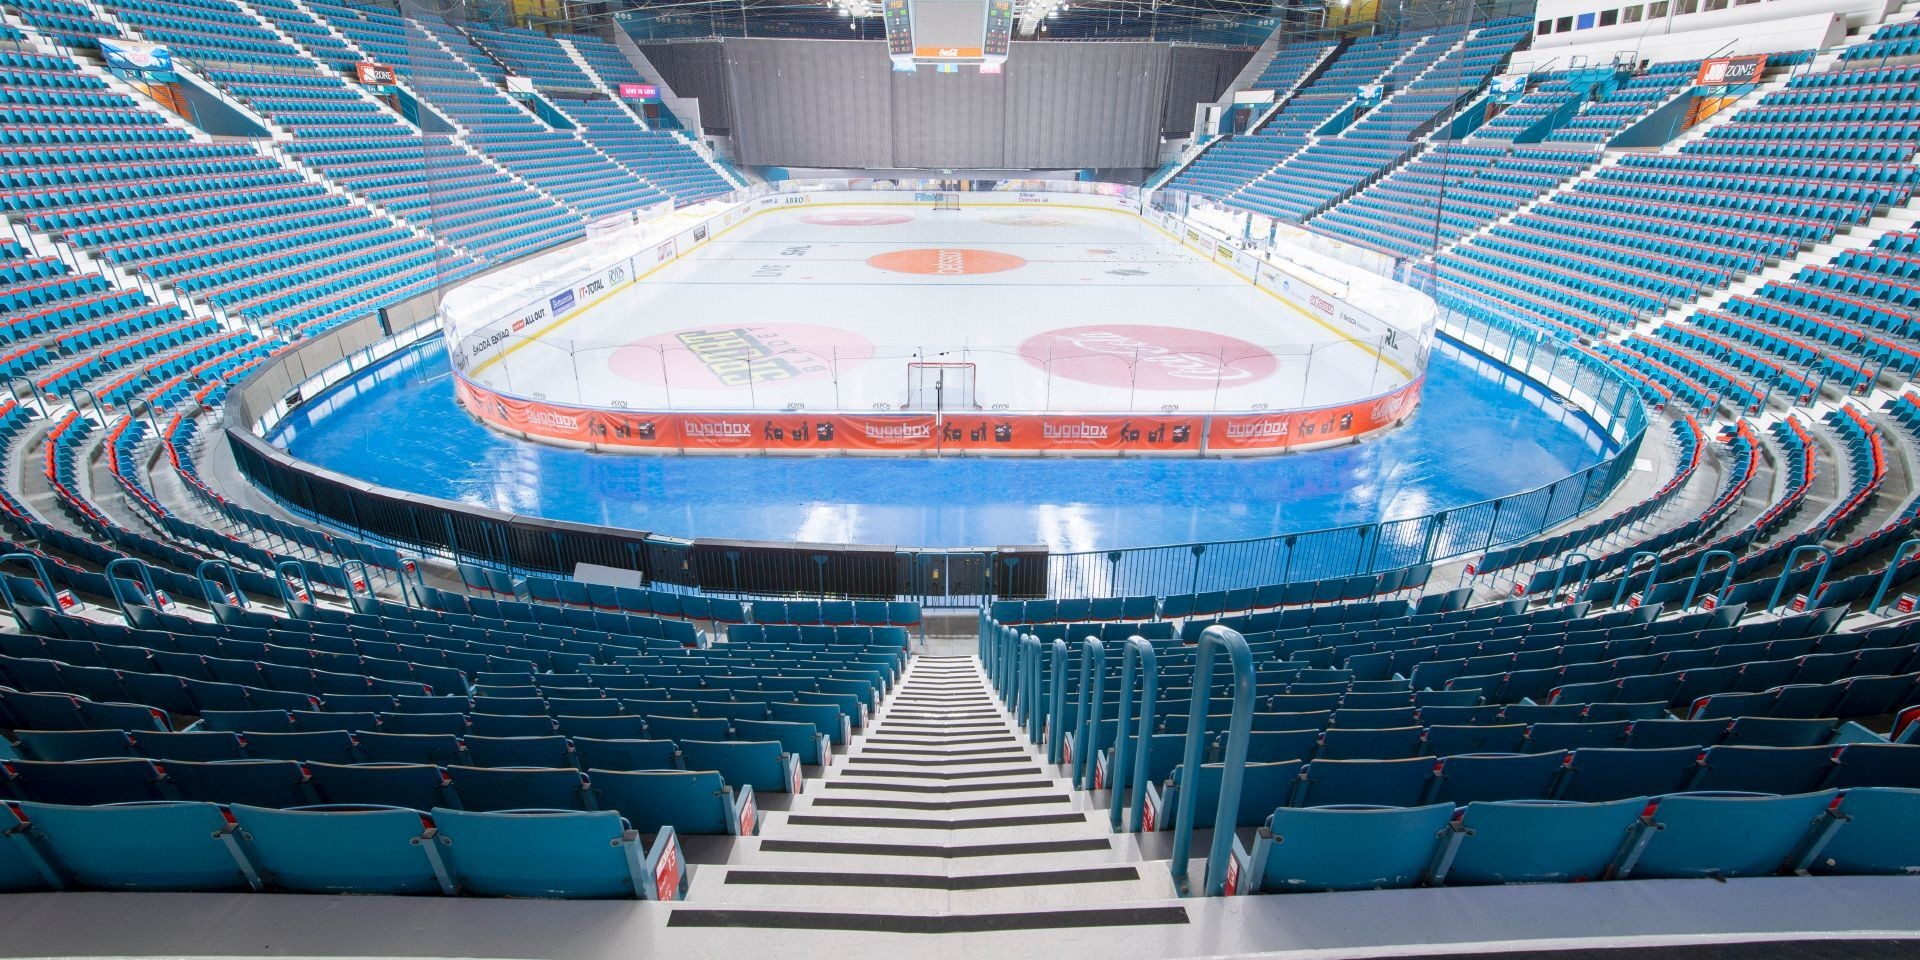 Coating solutions for floor surfaces in sports arenas and ice hockey centres